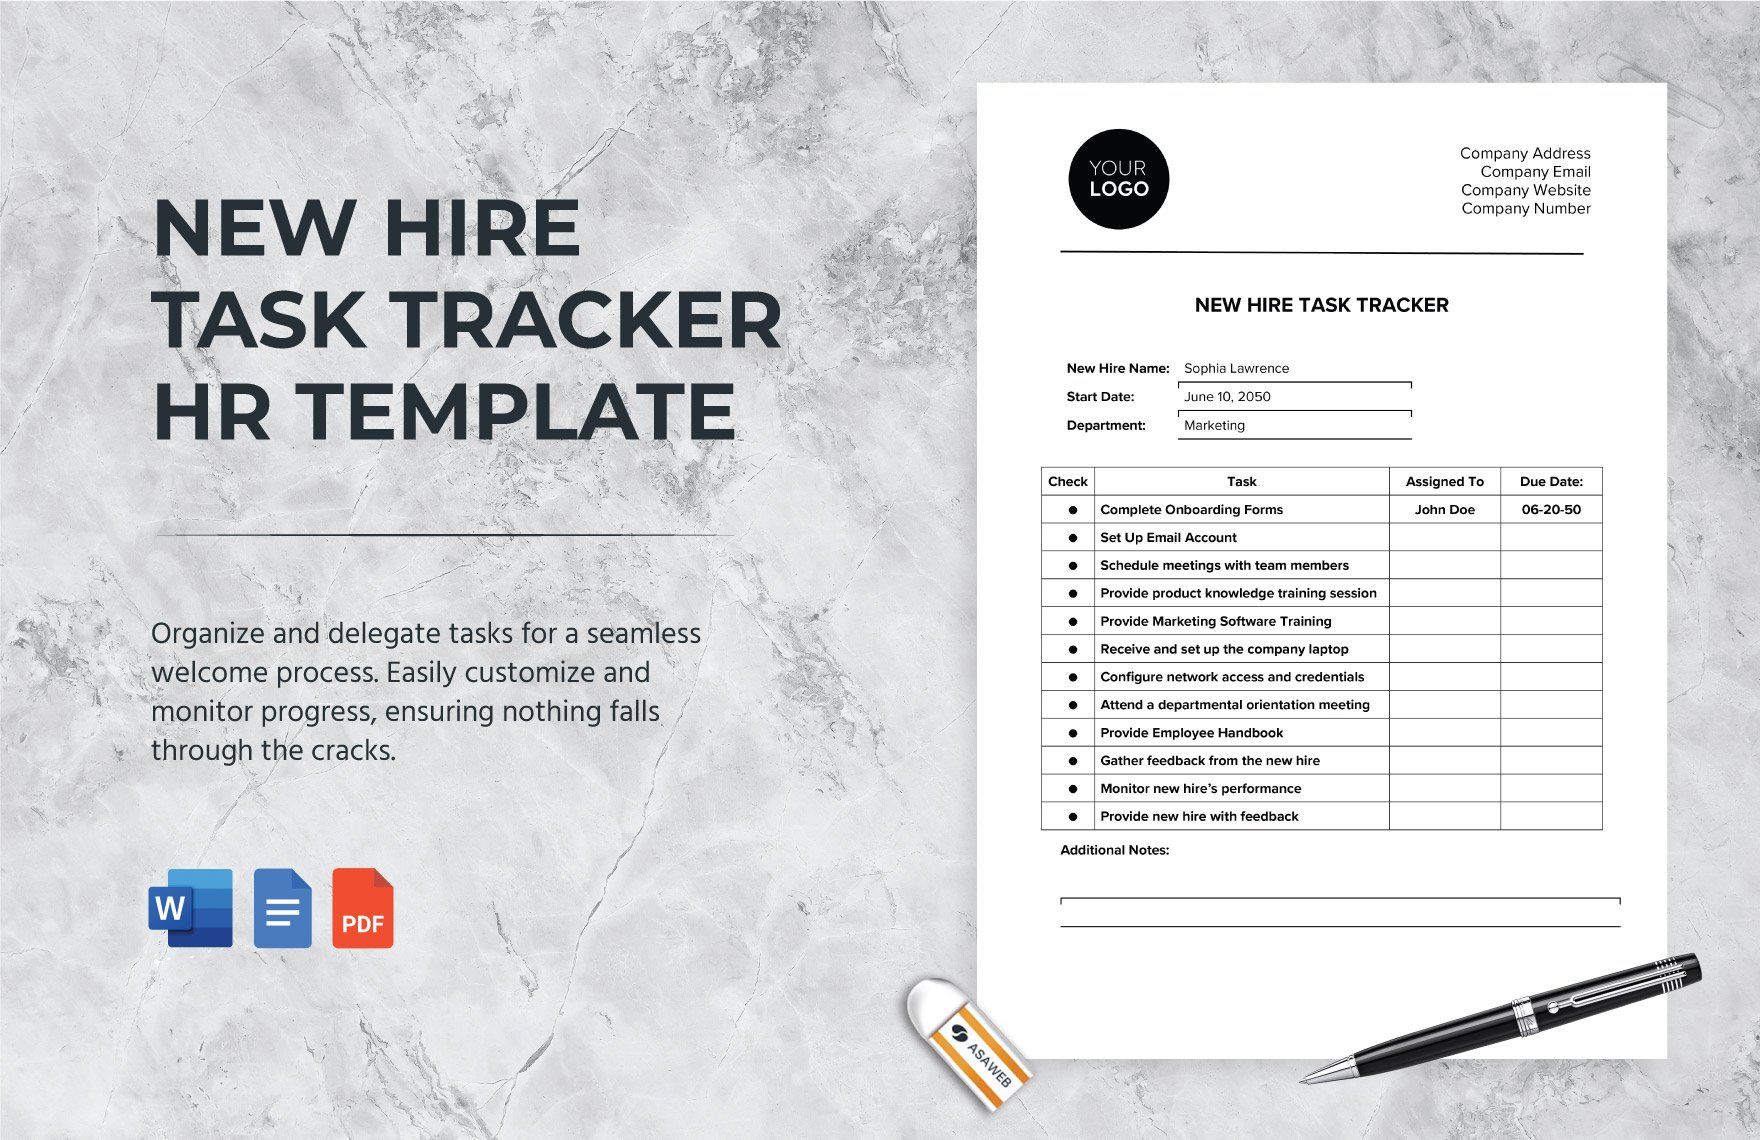 New Hire Task Tracker HR Template in Word, Google Docs, PDF